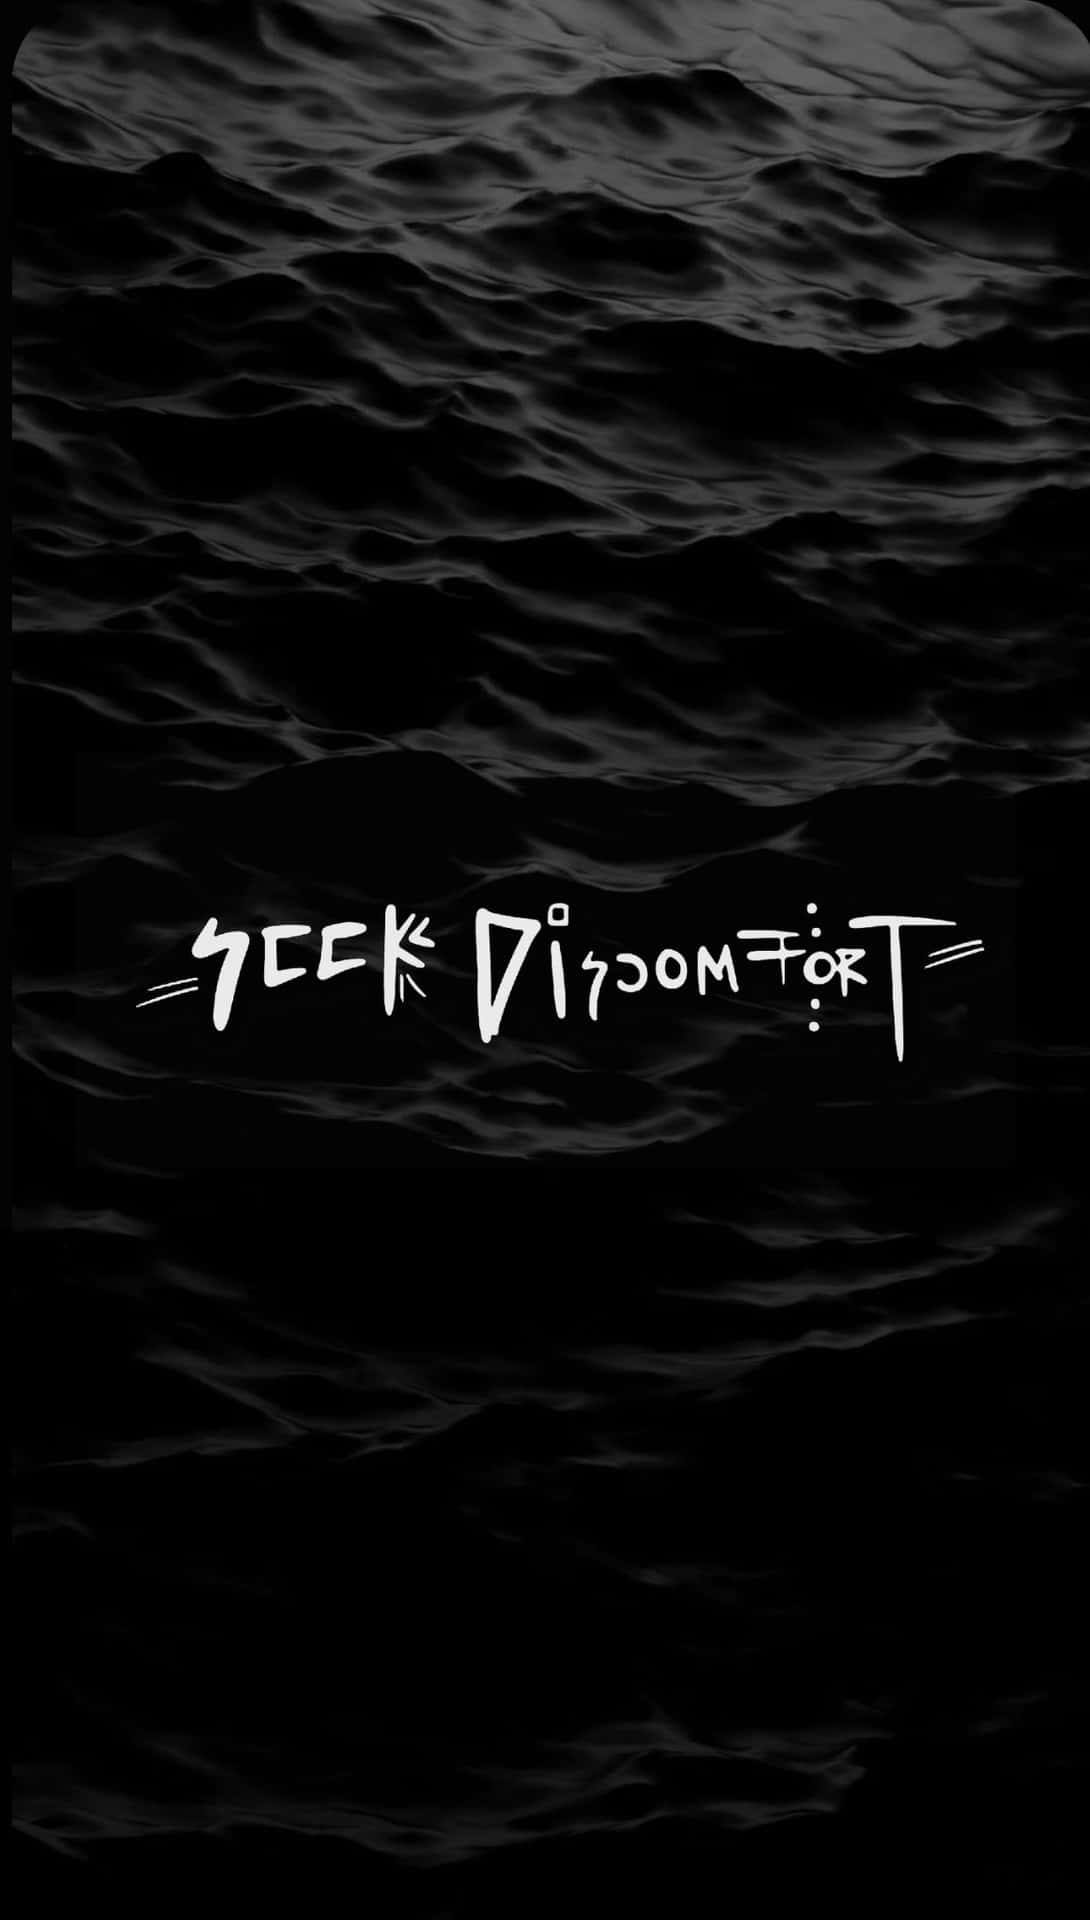 A Black And White Image Of The Word'seek Discord' Wallpaper